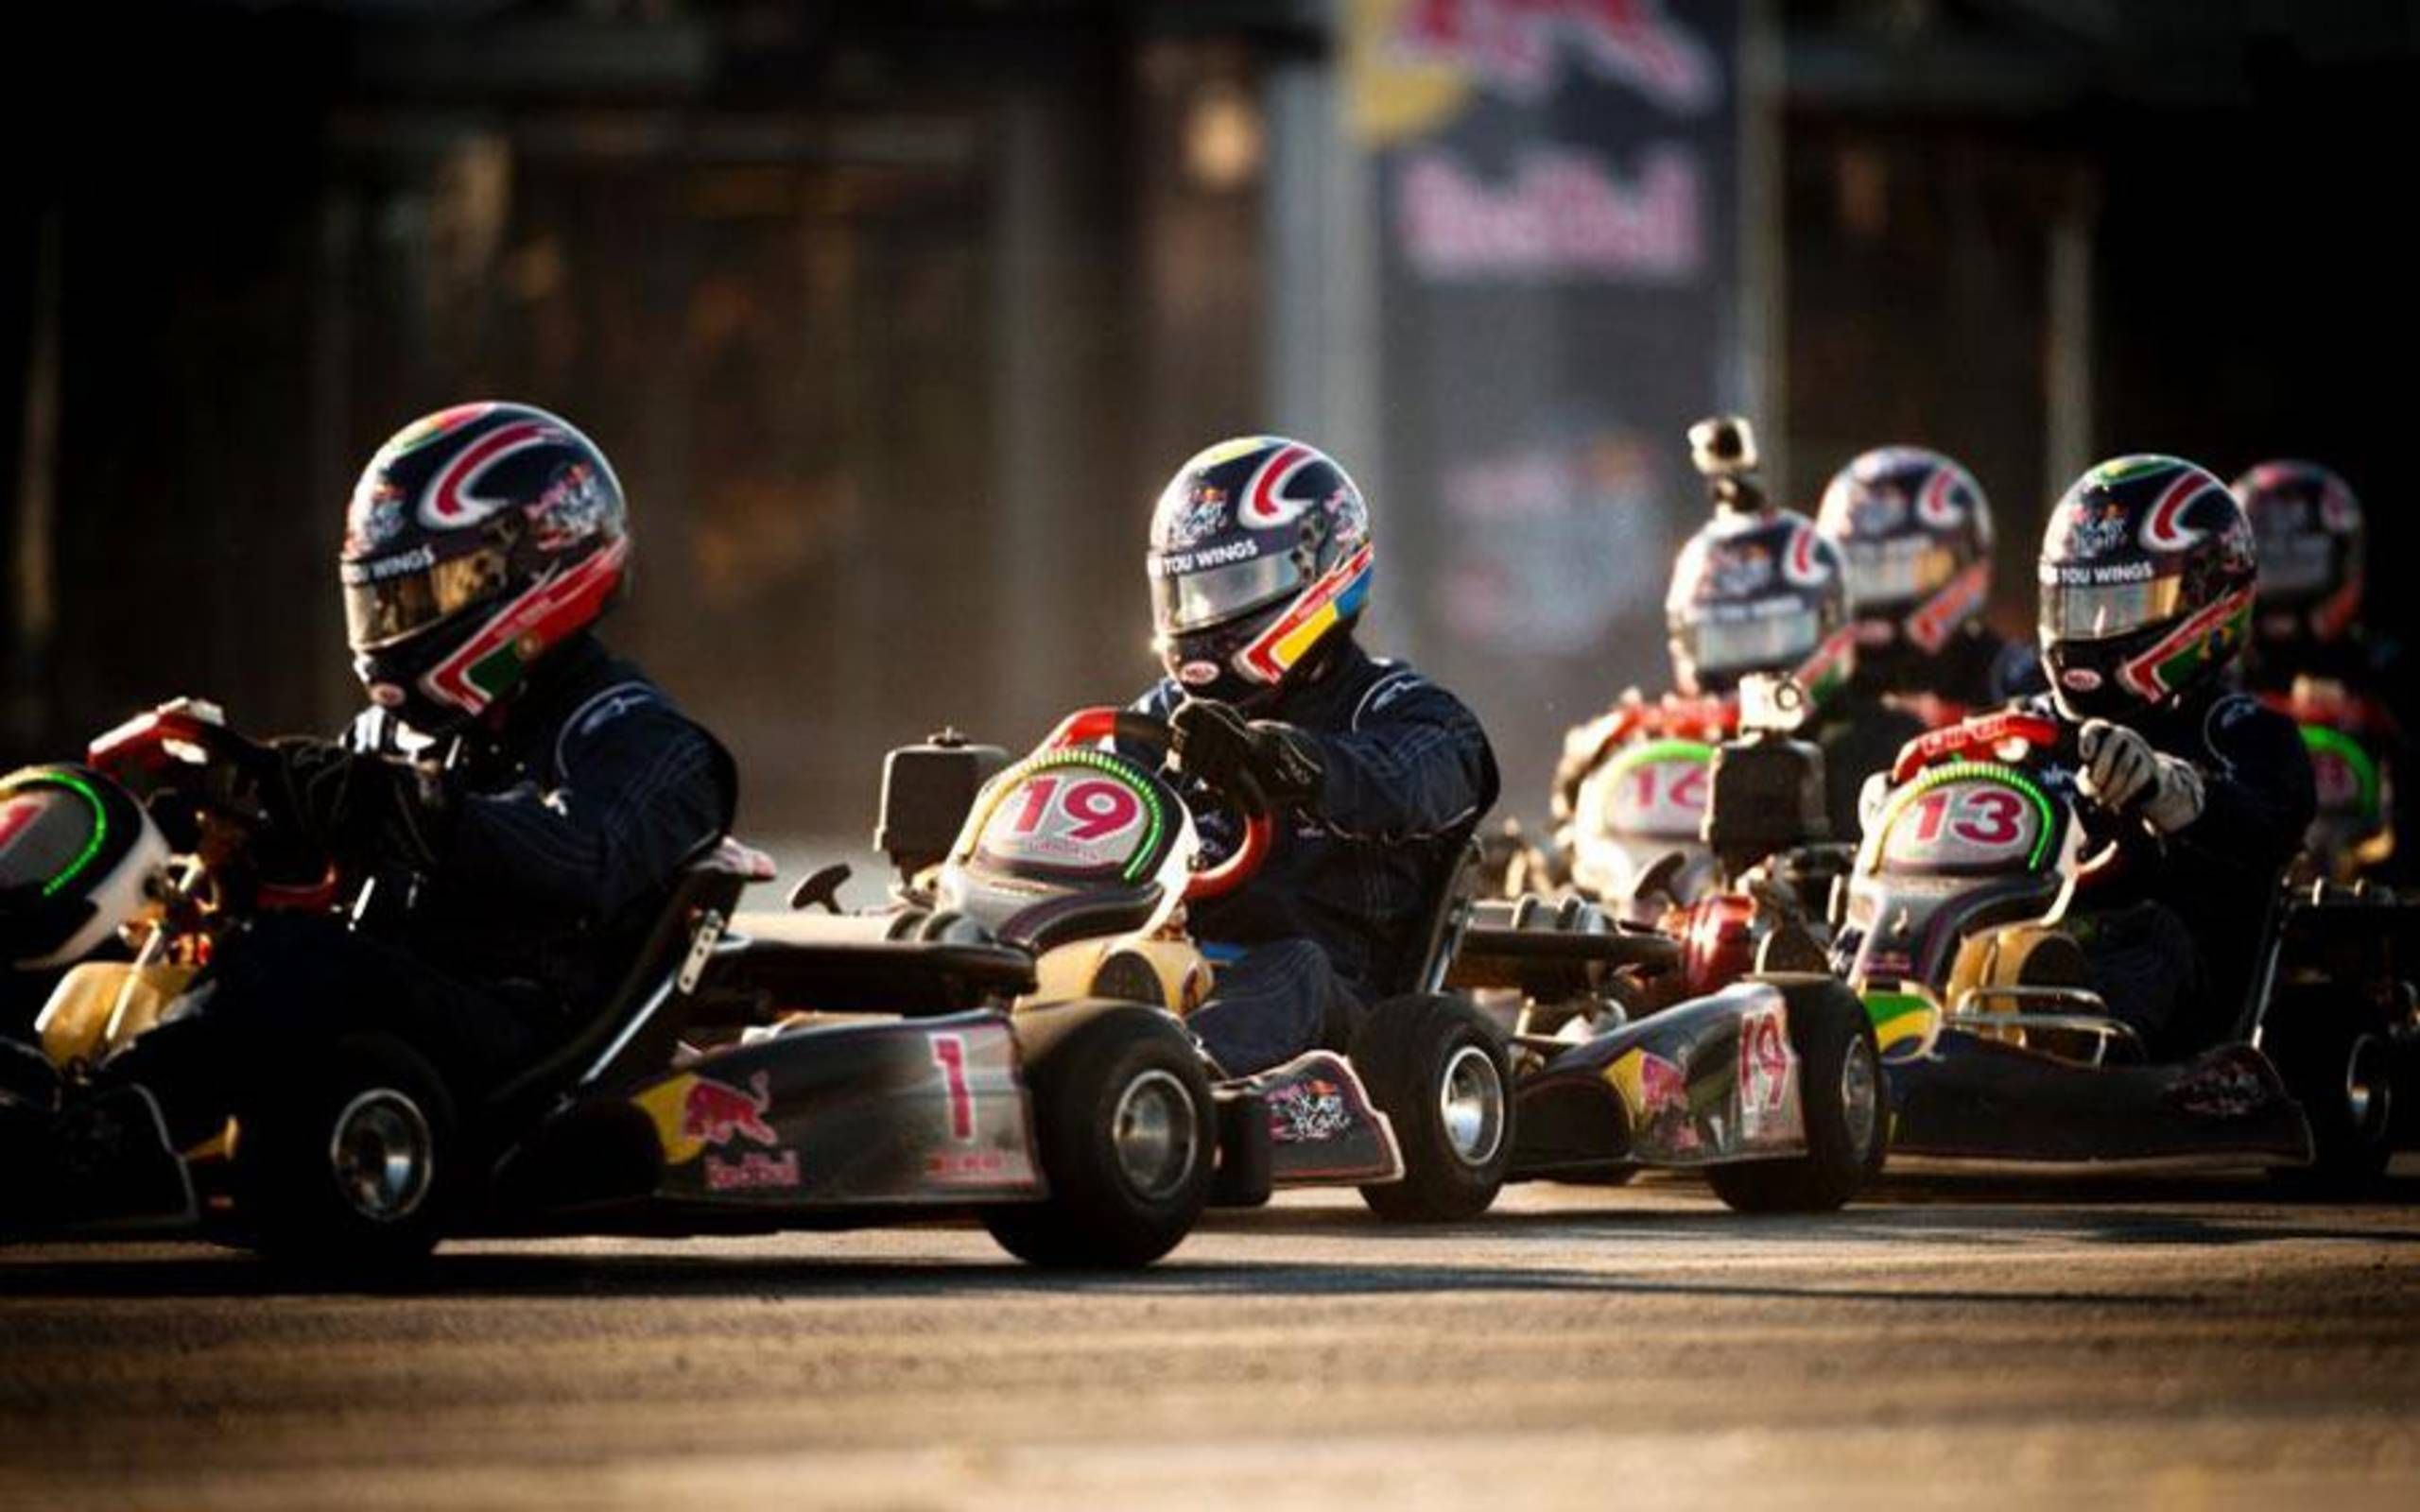 Japanese 13-year-old Shinji captures Red Bull Fight in Italy